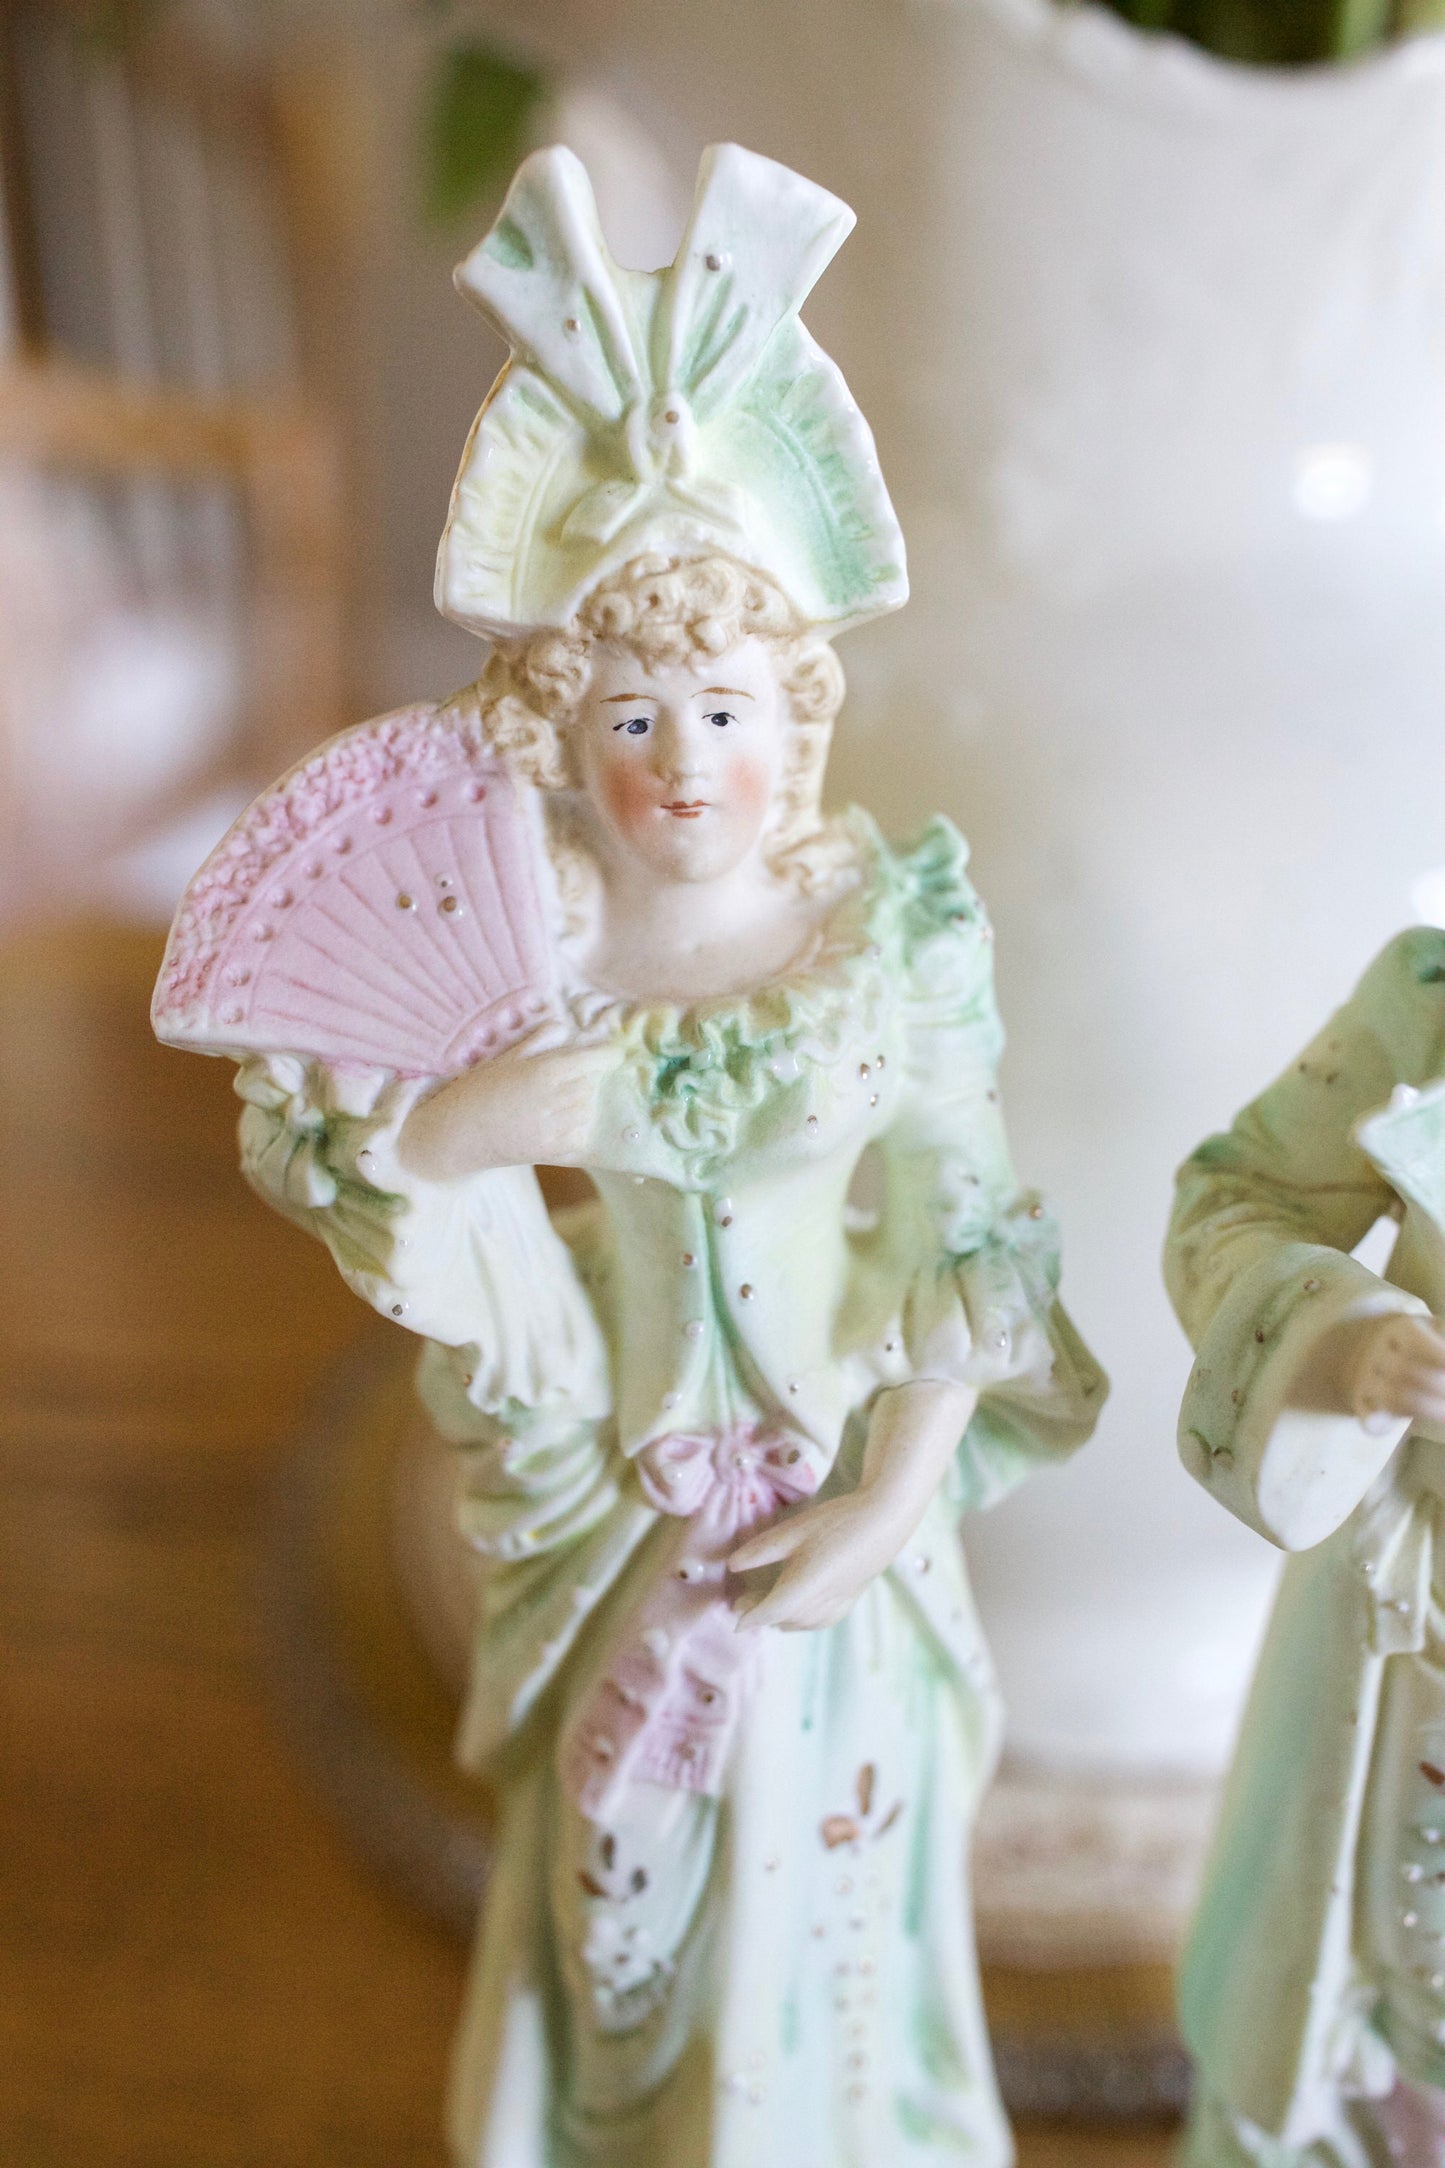 Painted Bisque Figurines- Pair of Bisque Figures- Green,Peach